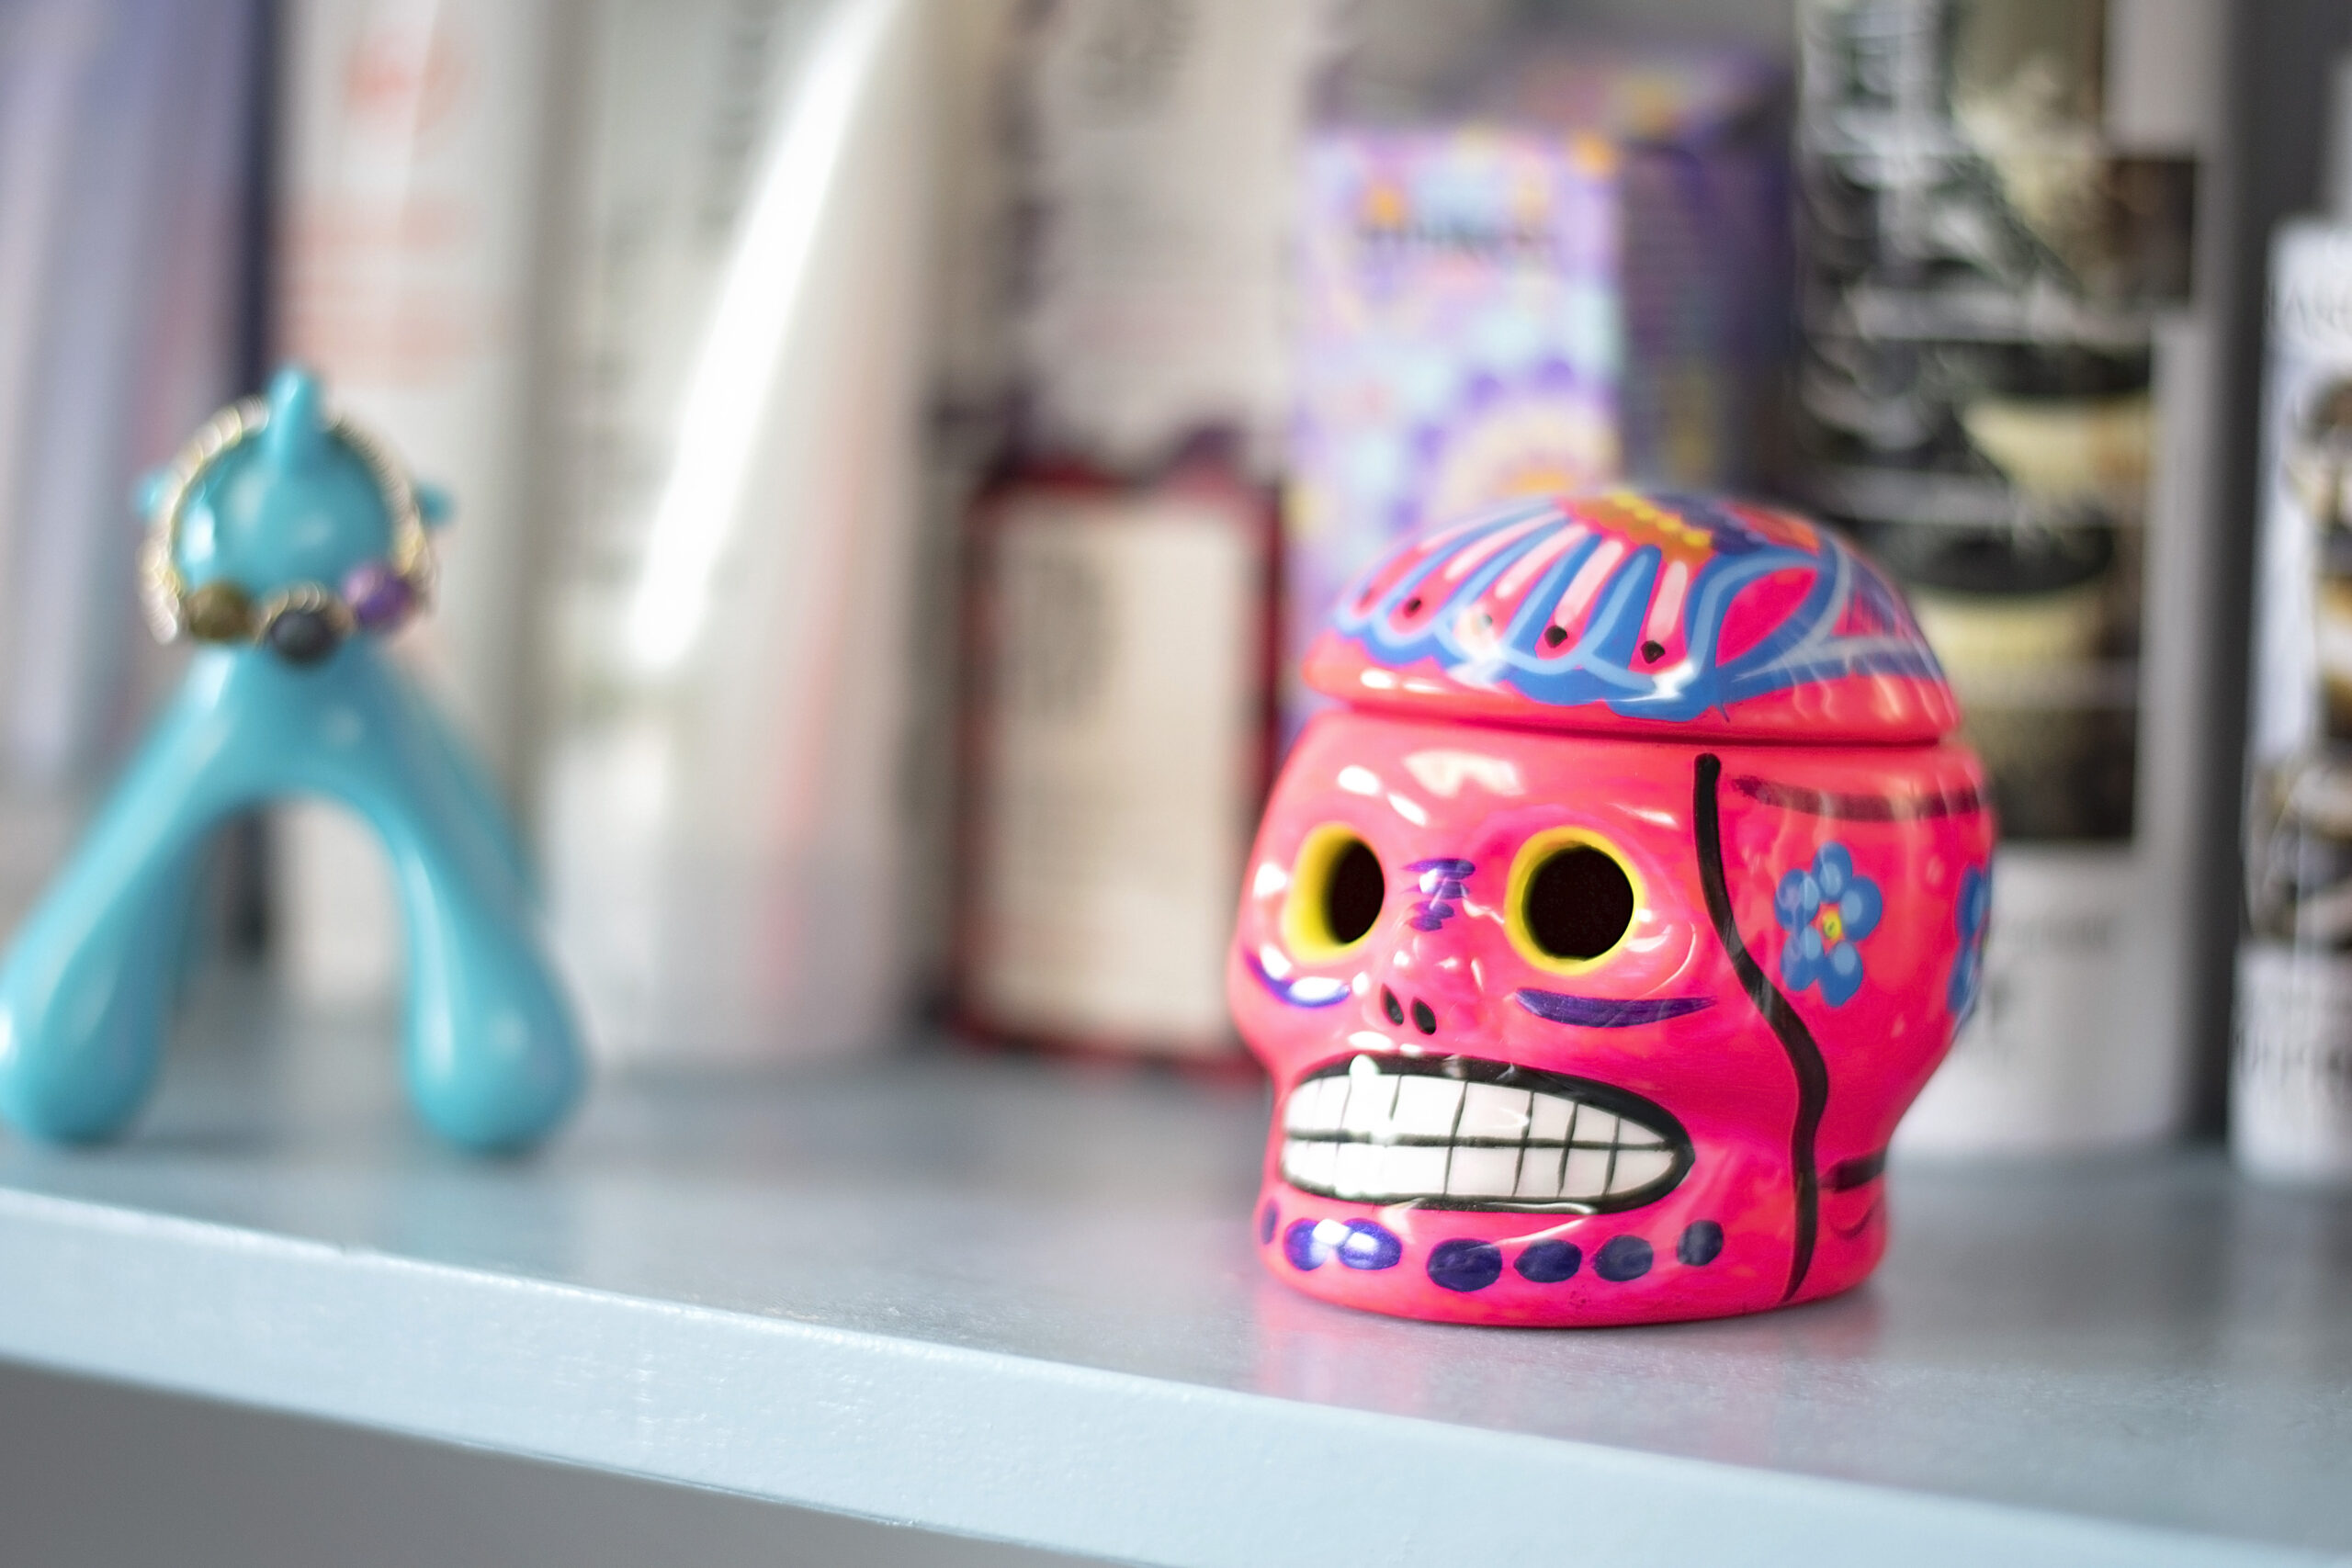 Sugar skull and hair products on a shelf